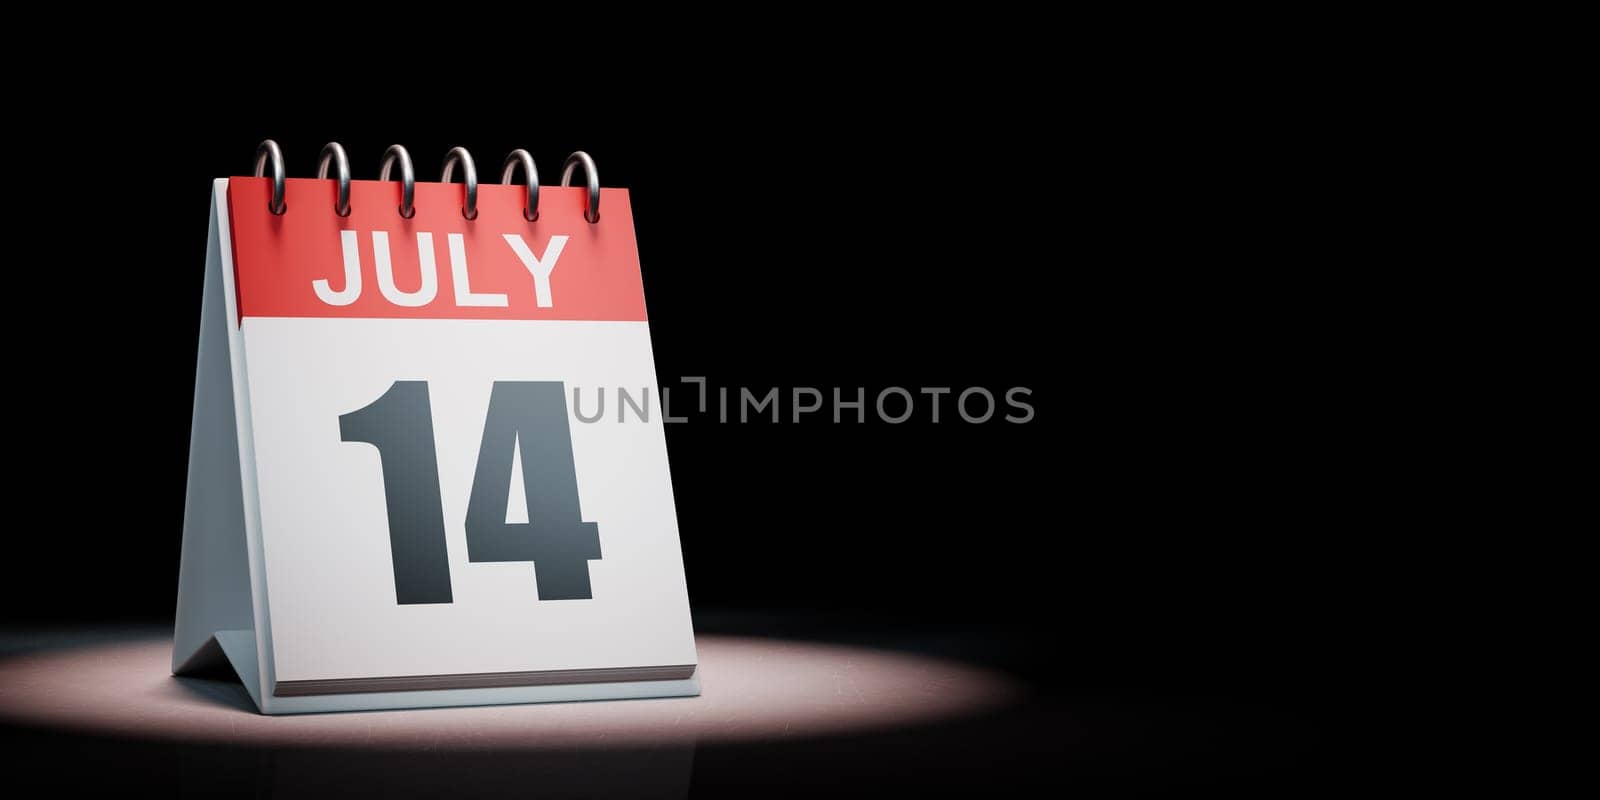 Red and White July 14 Desk Calendar Spotlighted on Black Background with Copy Space 3D Illustration